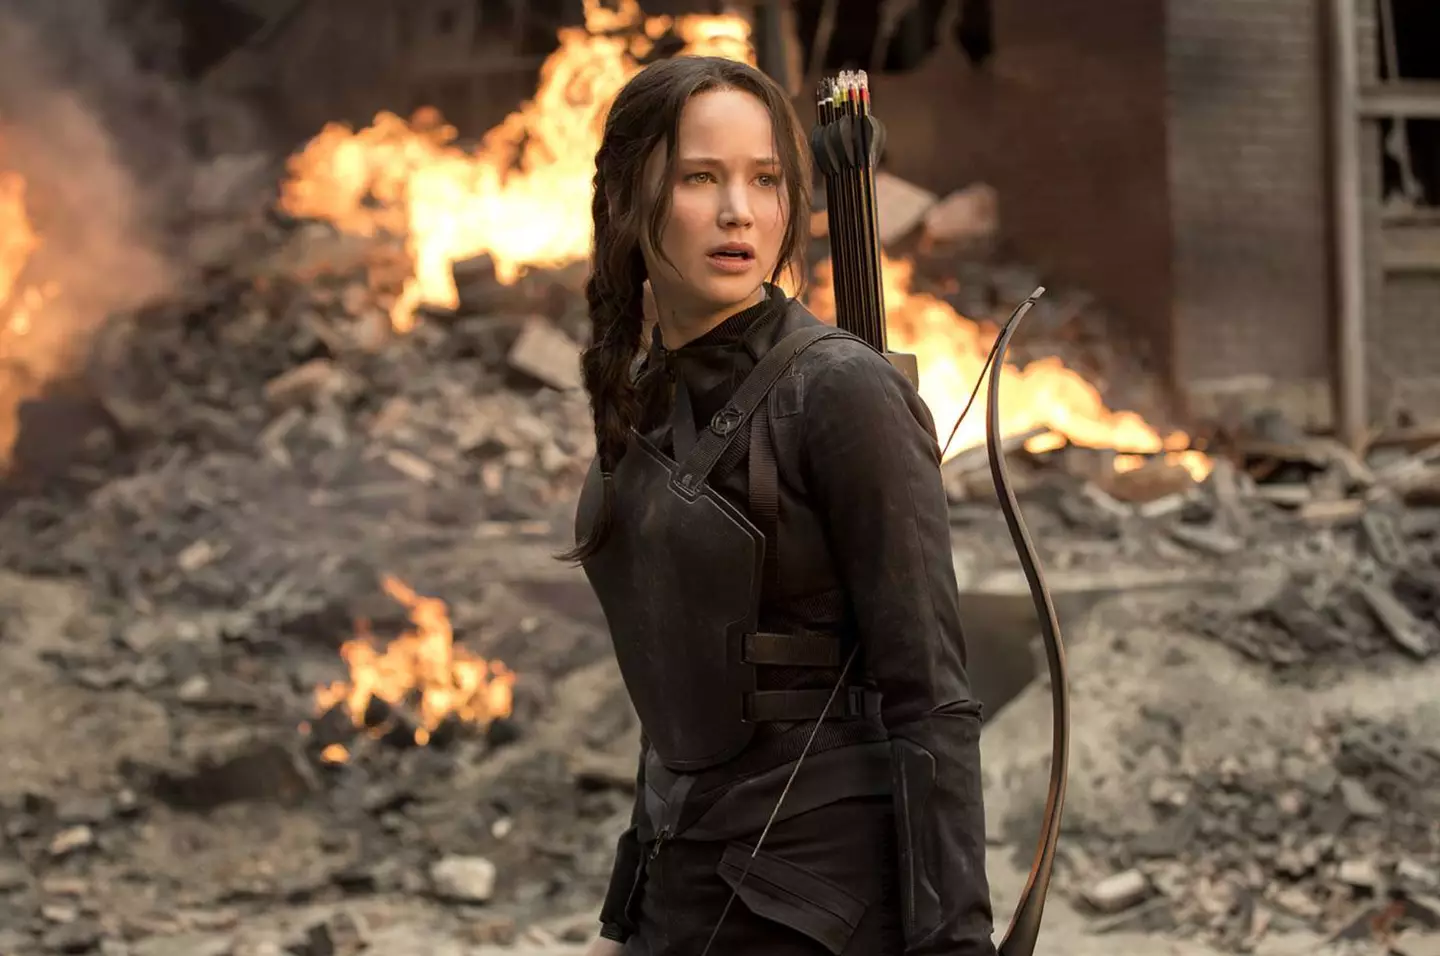 The actor said she feels old now that a new Hunger Games film is in the works.